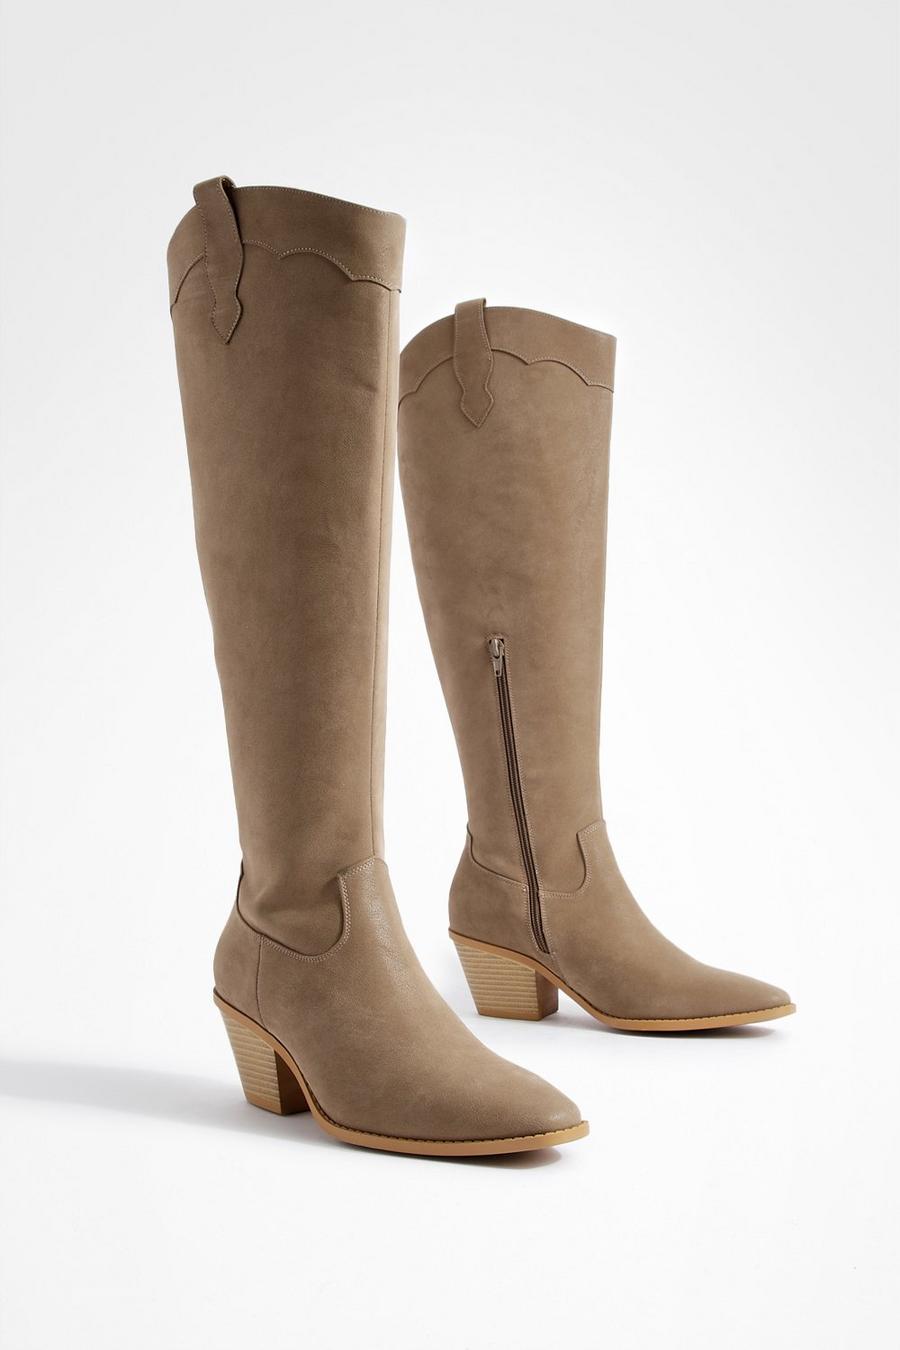 Taupe beige Knee High Cowboy Western Boots